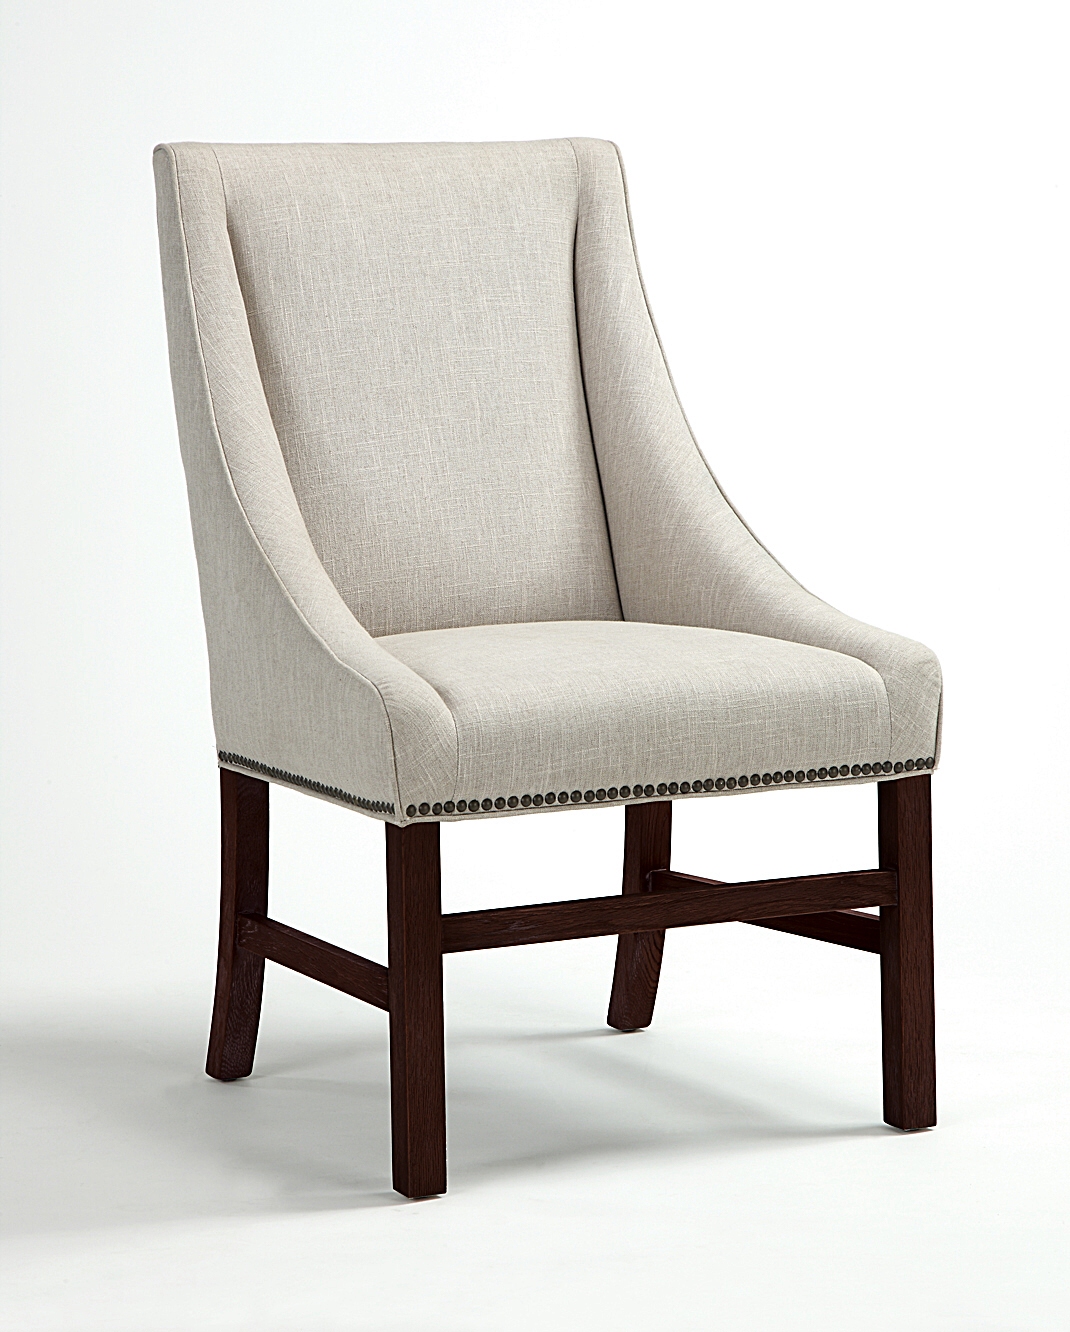 Dining chair upholstery - large and beautiful photos. Photo to select